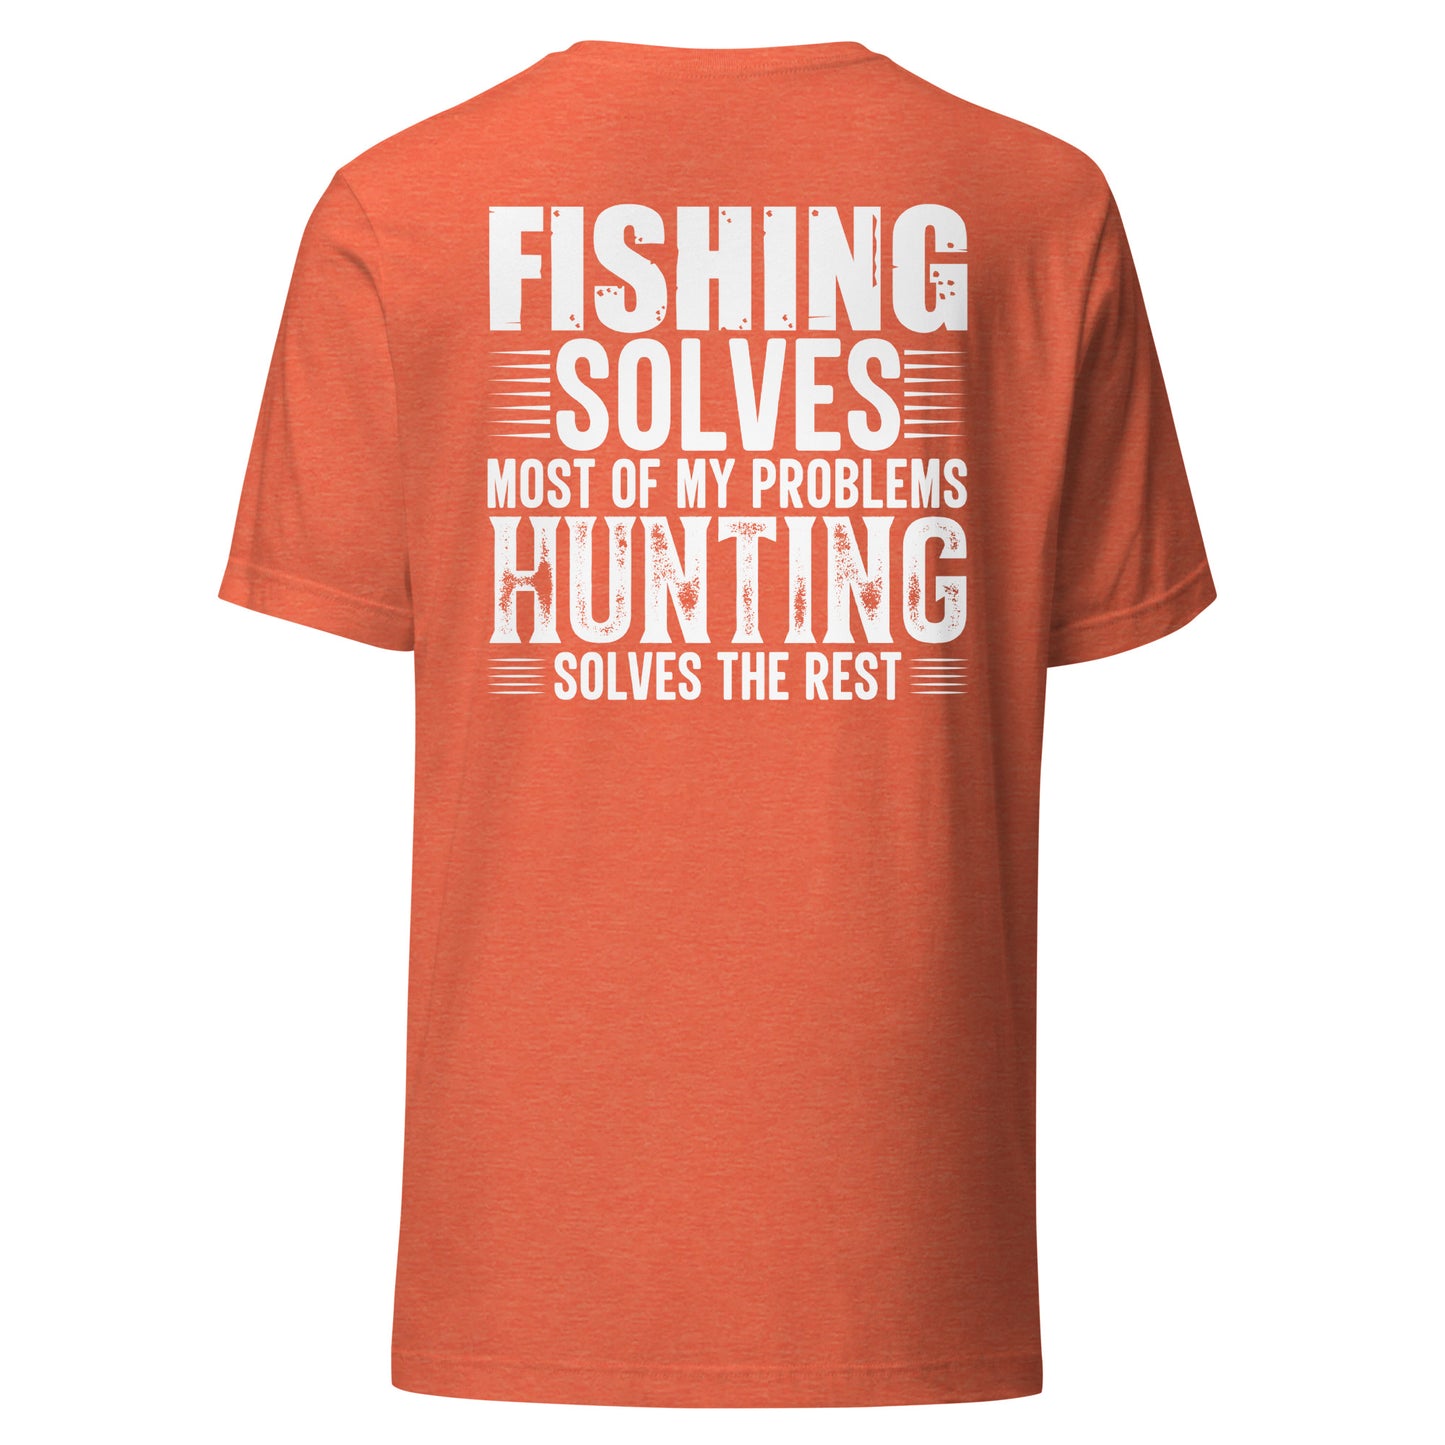 Fishing Solves Most of My Problems... T-shirt